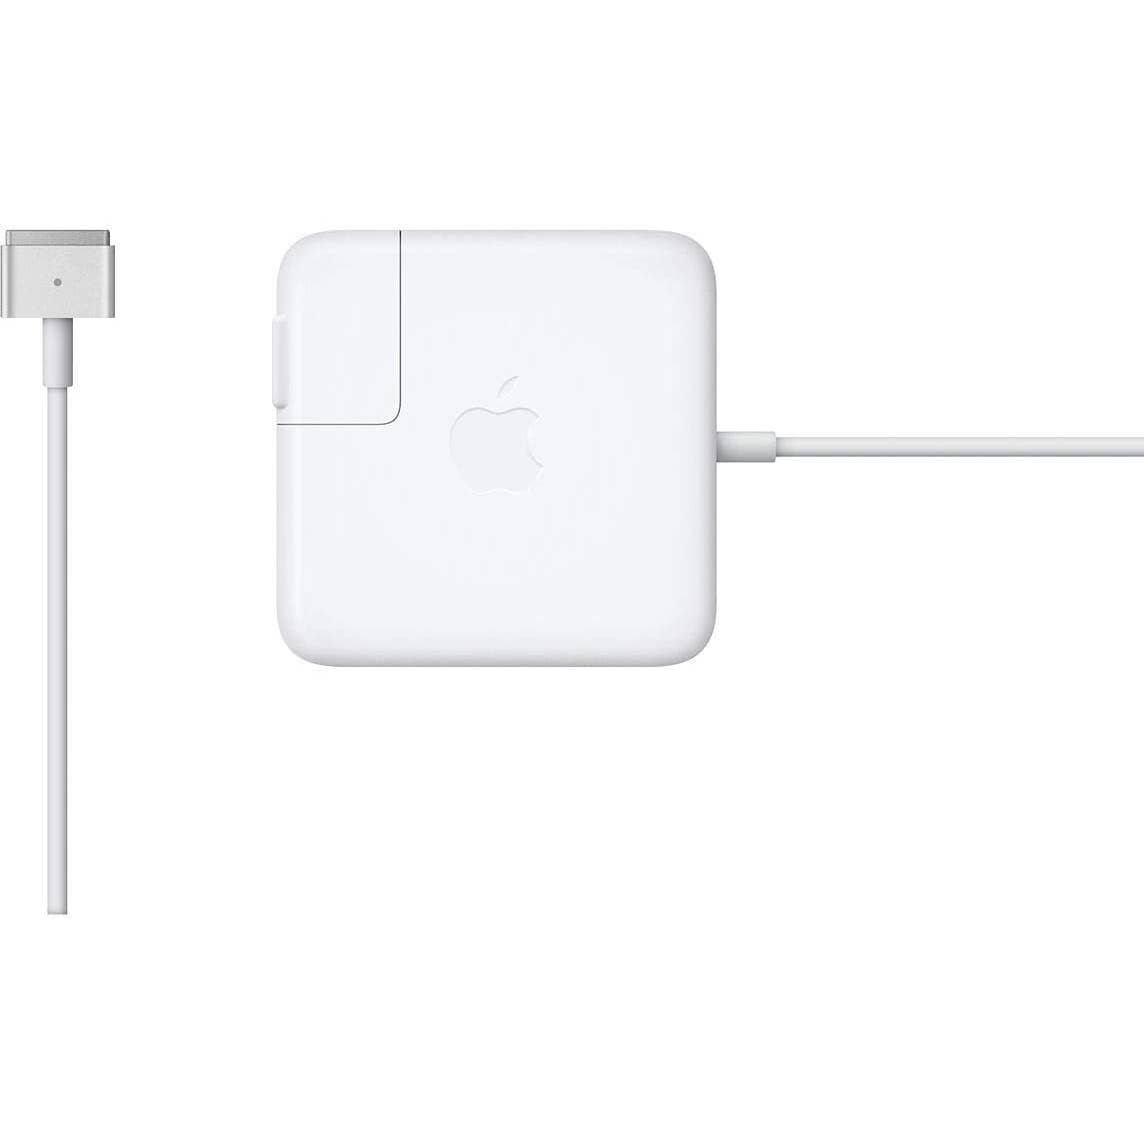 Apple - MD506LL/A 85W MagSafe 2 Power Adapter with Magnetic DC Connector - White